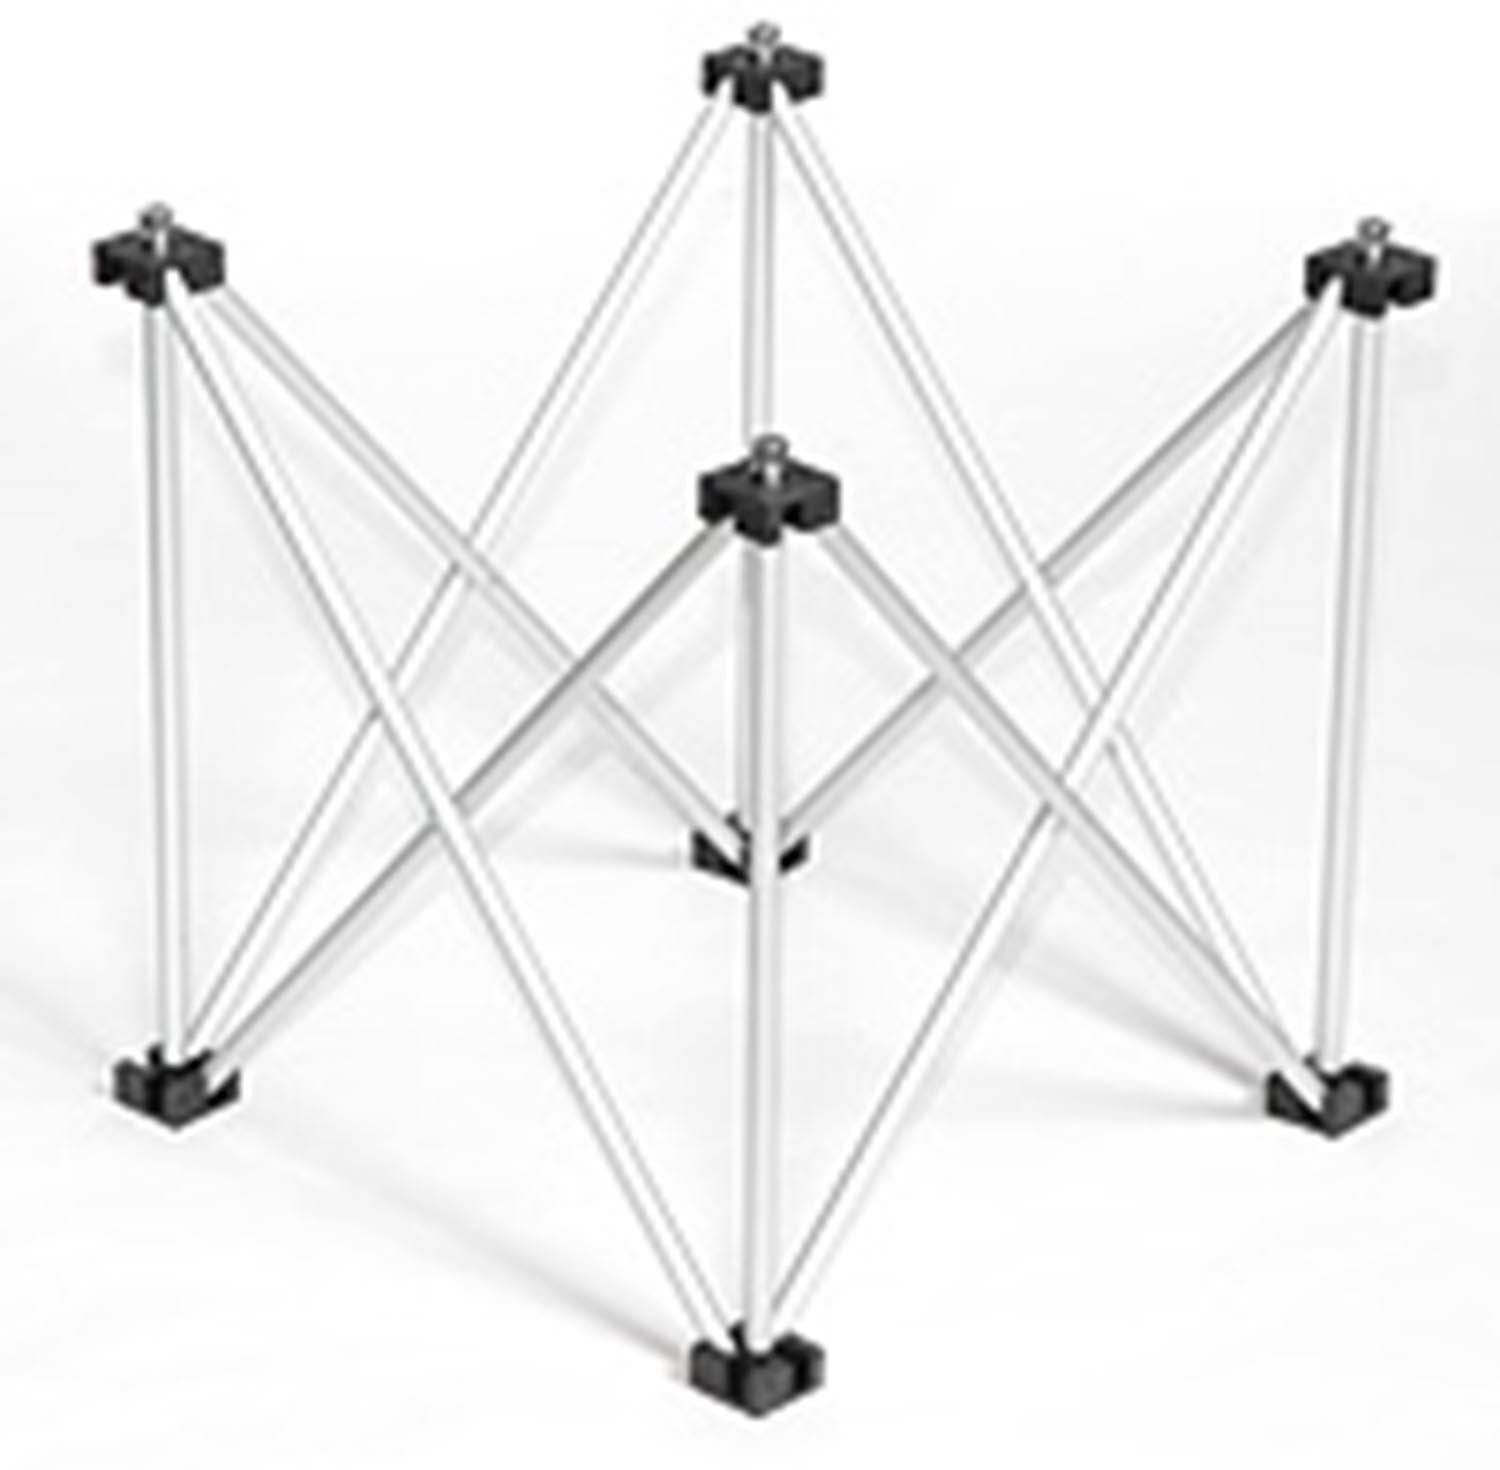 Intellistage ISIT3X16, 16 Inches High Riser for 3 Feet 90 Degree Right Triangle Folding Stage Platform - Hollywood DJ